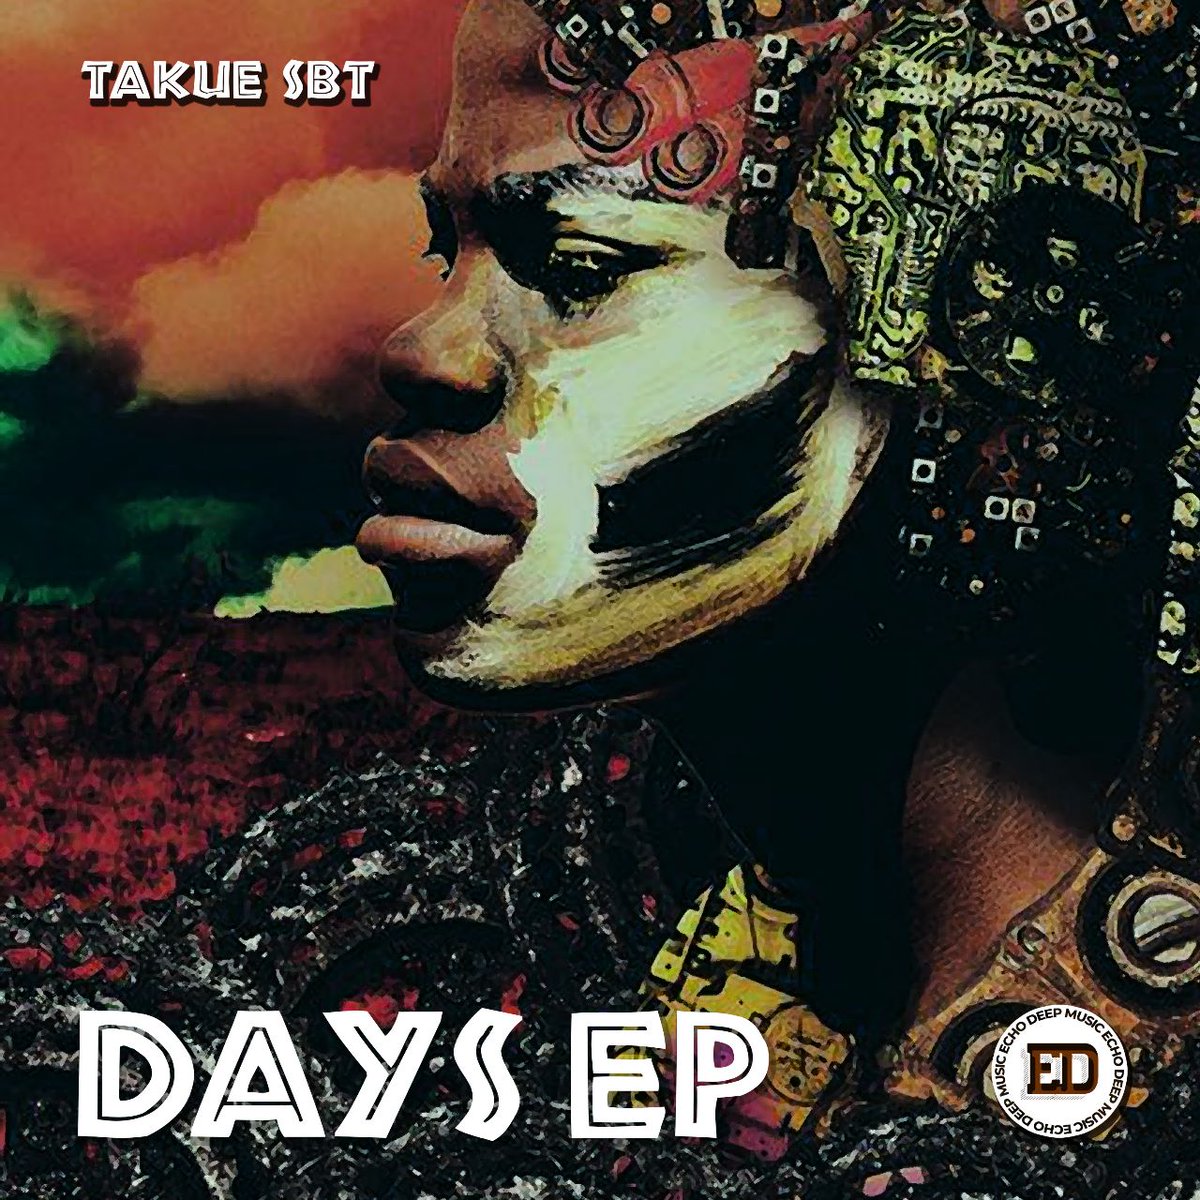 ⚡Days EP is now on pre-add coming out This Friday link:
hypeddit.com/00oa73

💥💥
#AfroTech/House
#AfroHousemusic
#AfroHouseDj
#WeekDays
#Sir_SBT